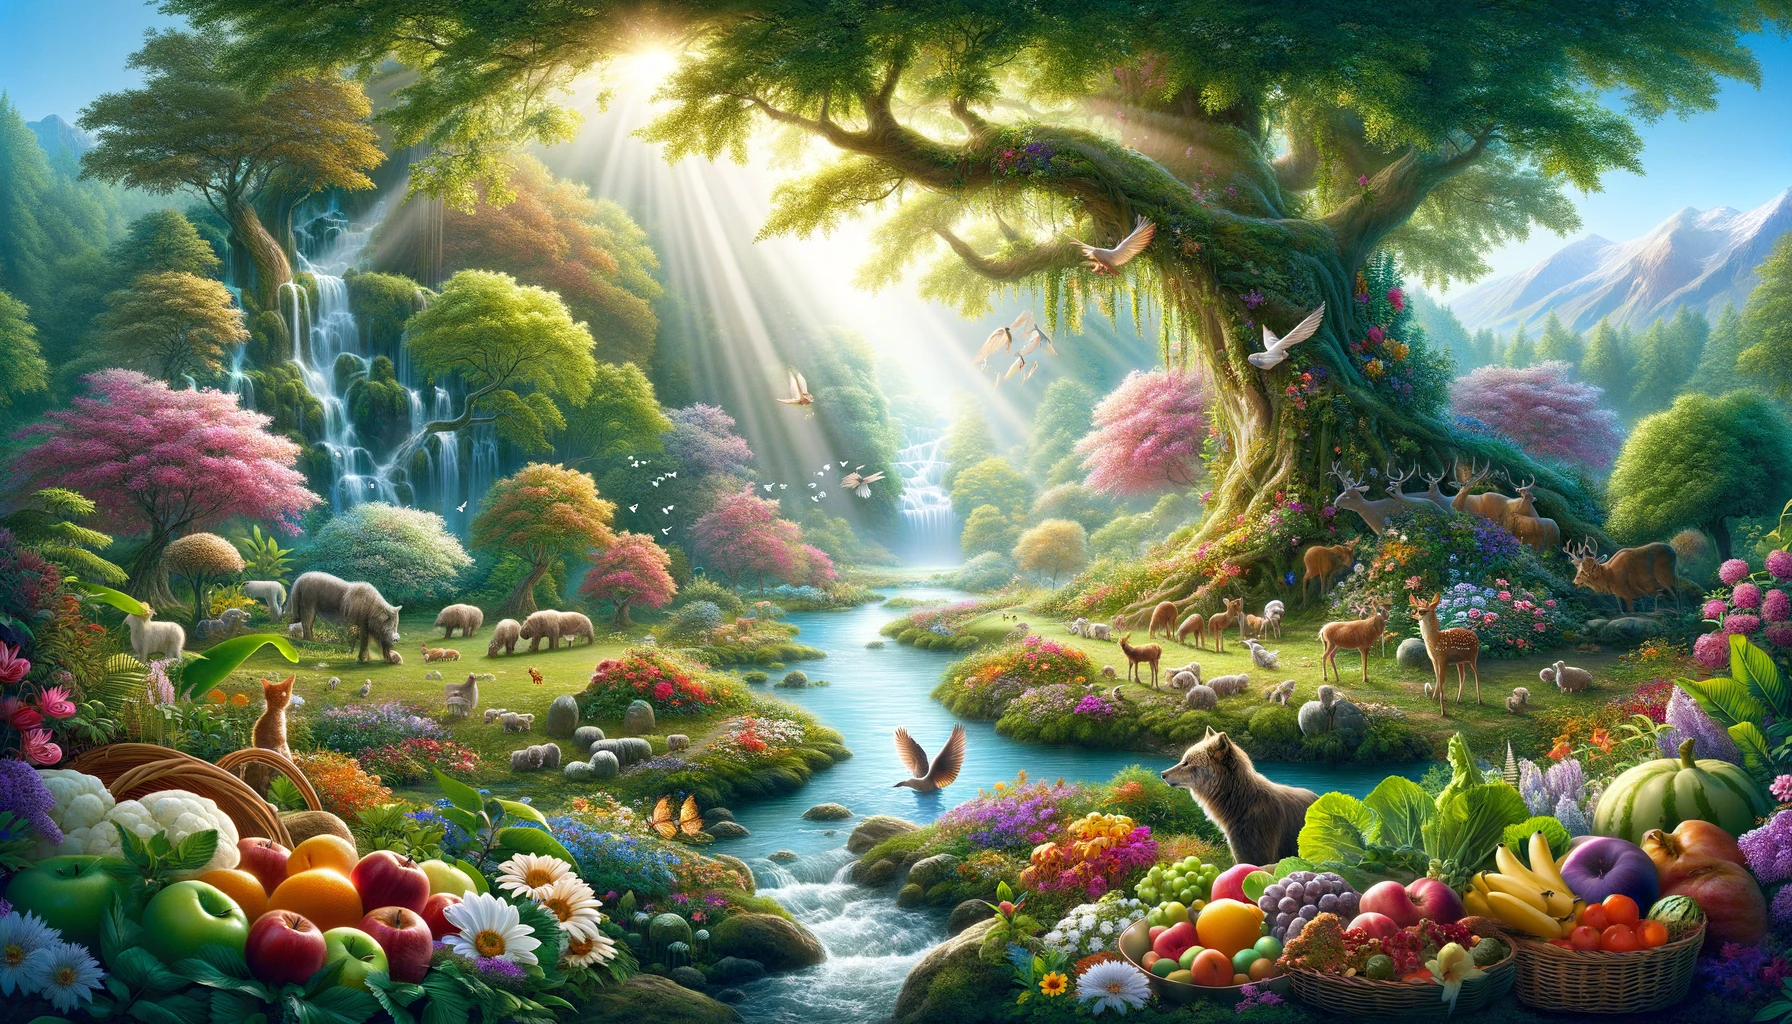 A 16_9 widescreen image that beautifully illustrates the theme of 'God's Gifts'. The scene is set in a vibrant, lush garden that seems to embody a sli